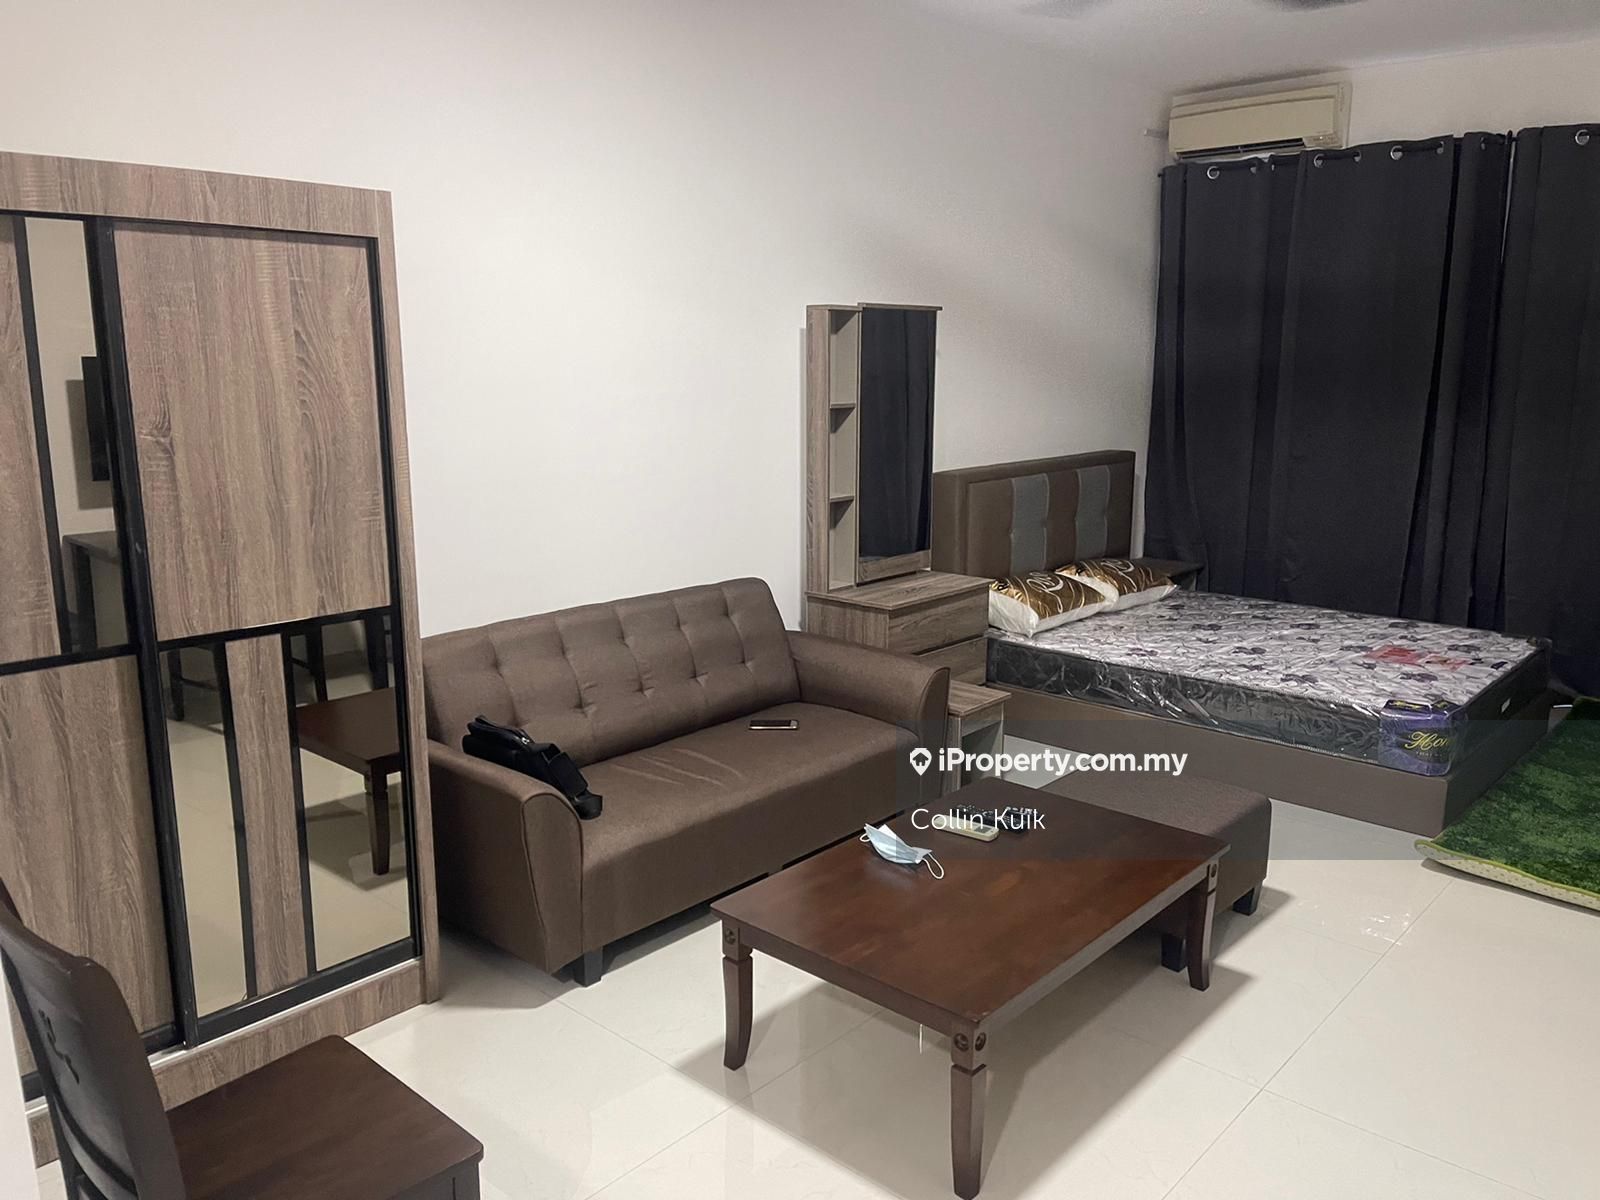 Country Garden Central Park Serviced Residence for rent in Johor Bahru